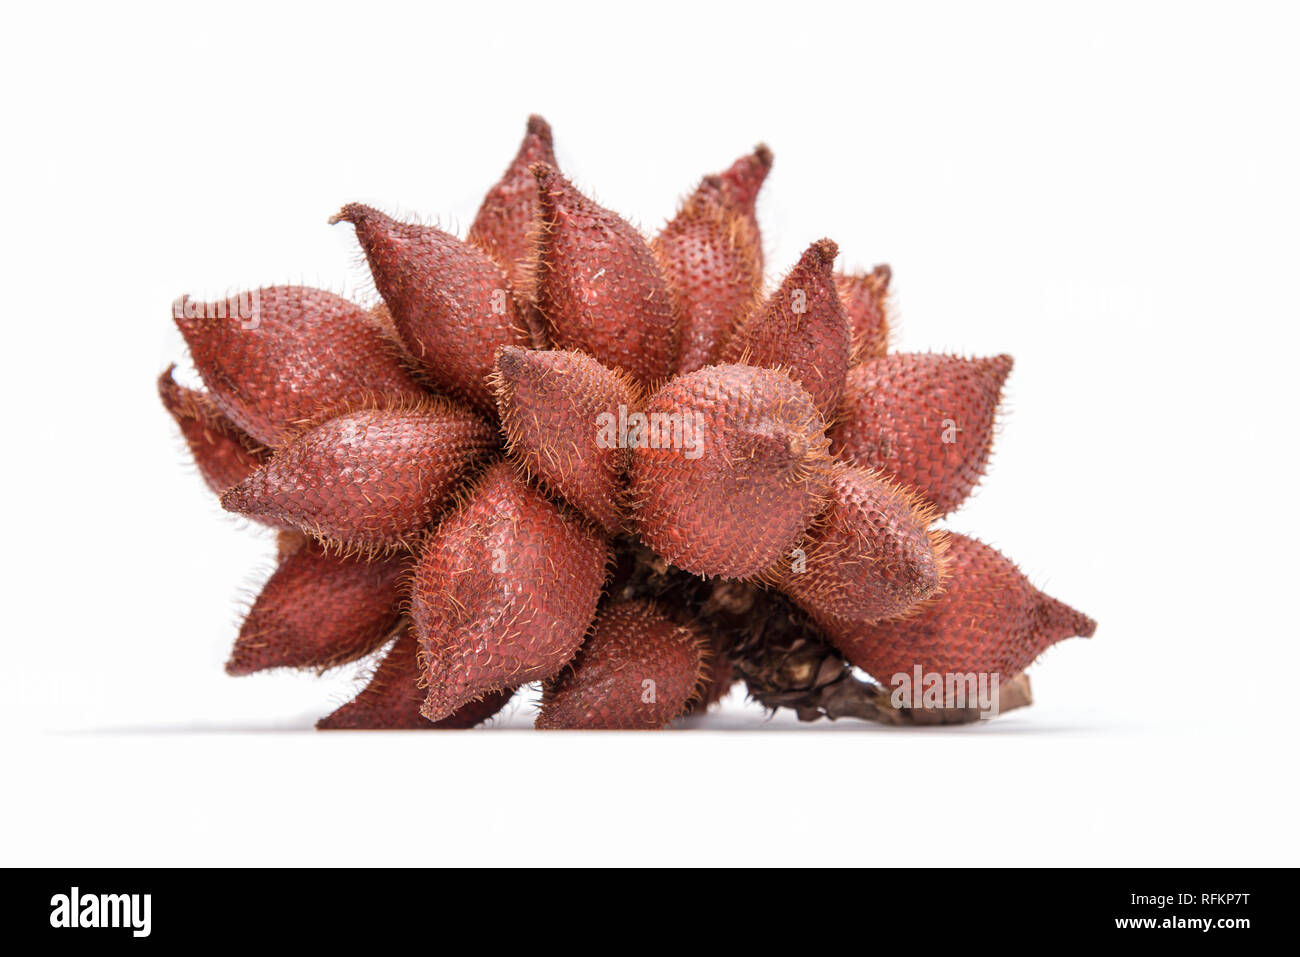 cluster of Zalacca or Salacca or Salak tropical asian fruits over white background Stock Photo